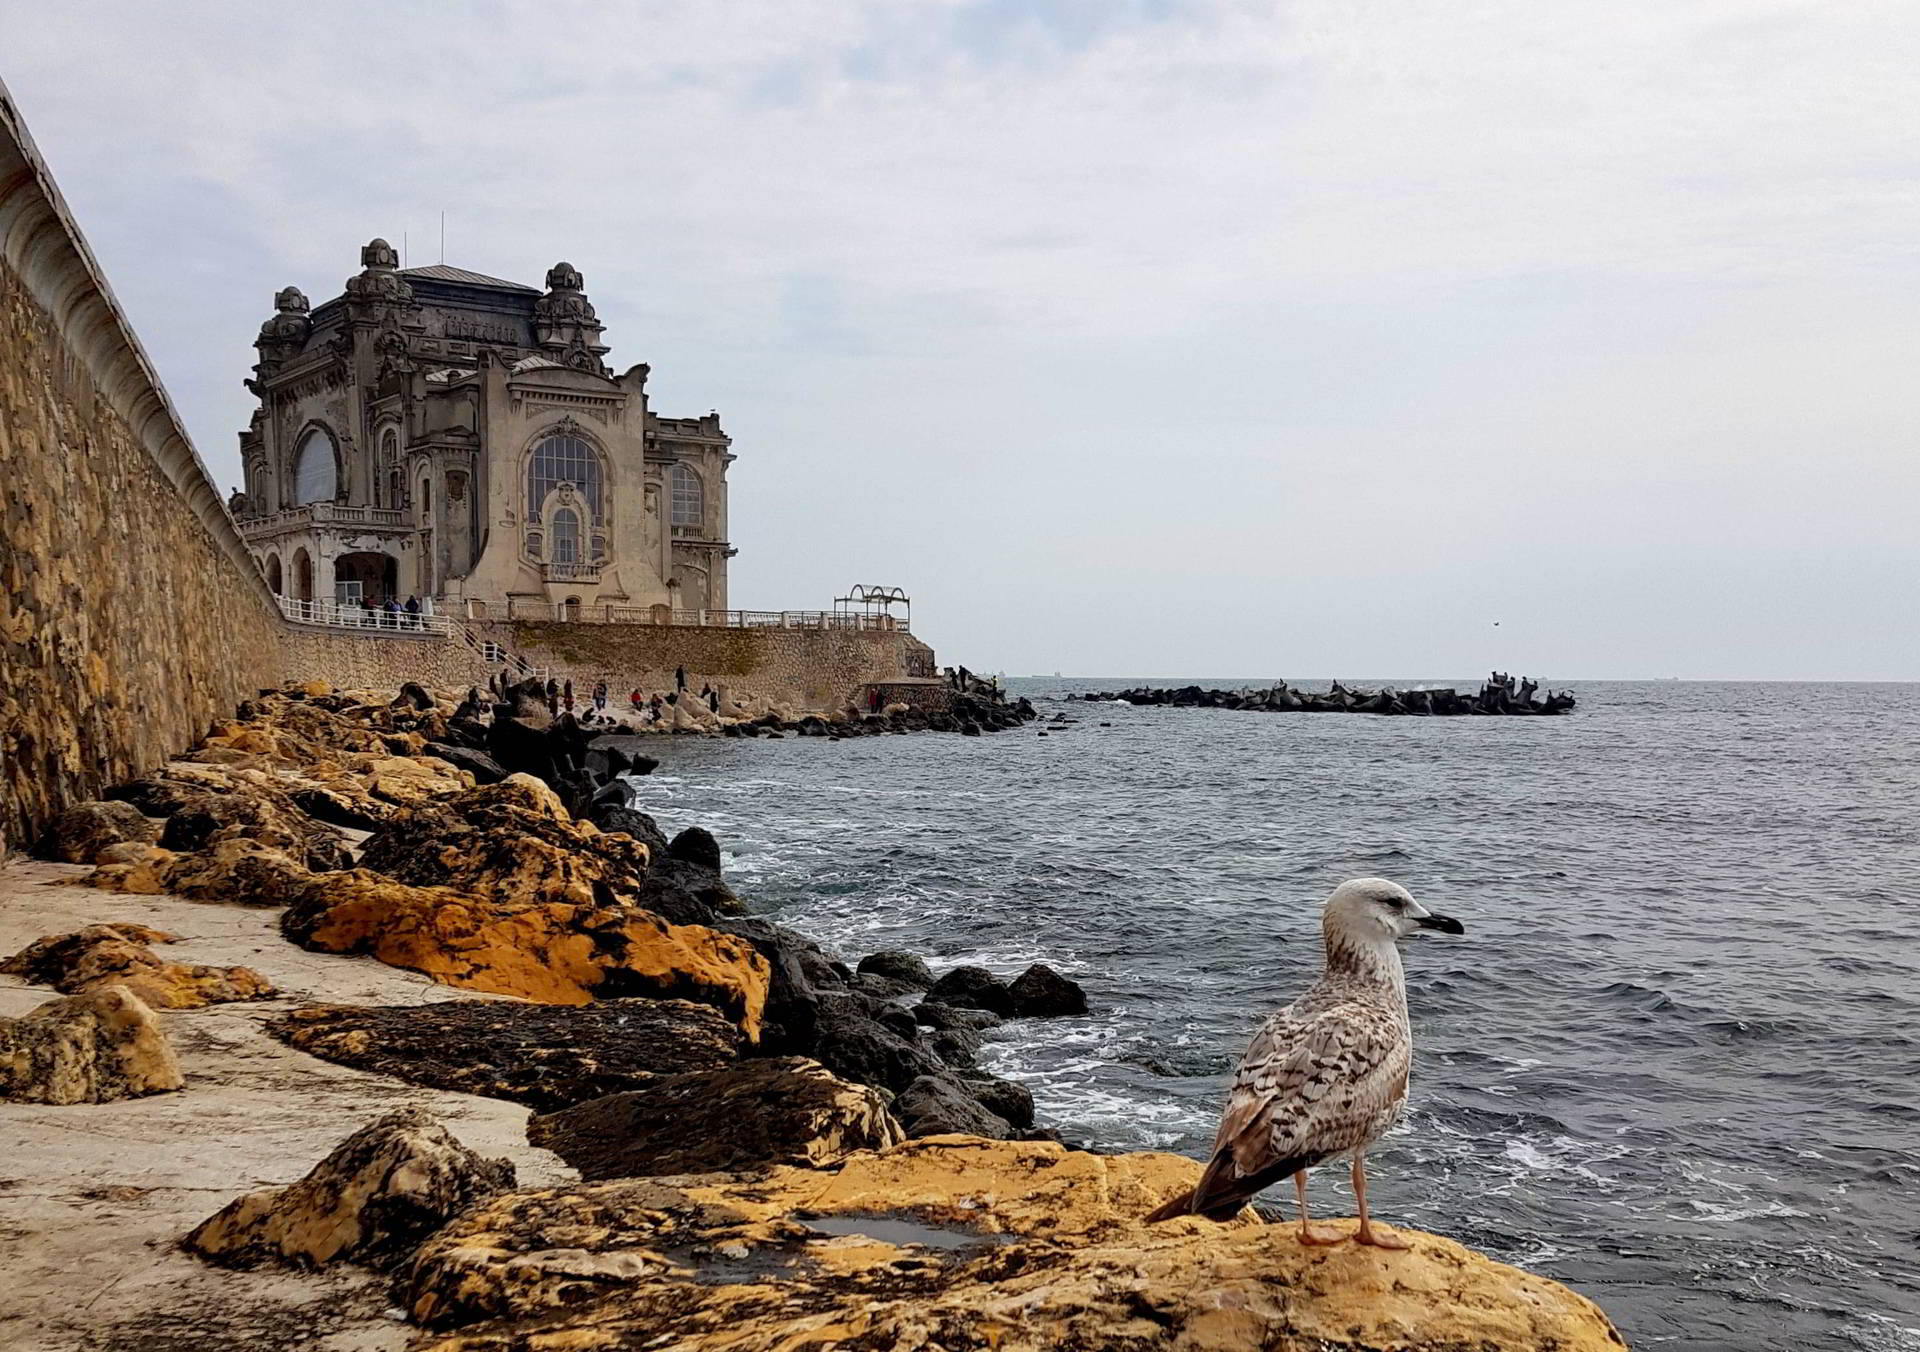 The Constanta Casino and its fabulous history